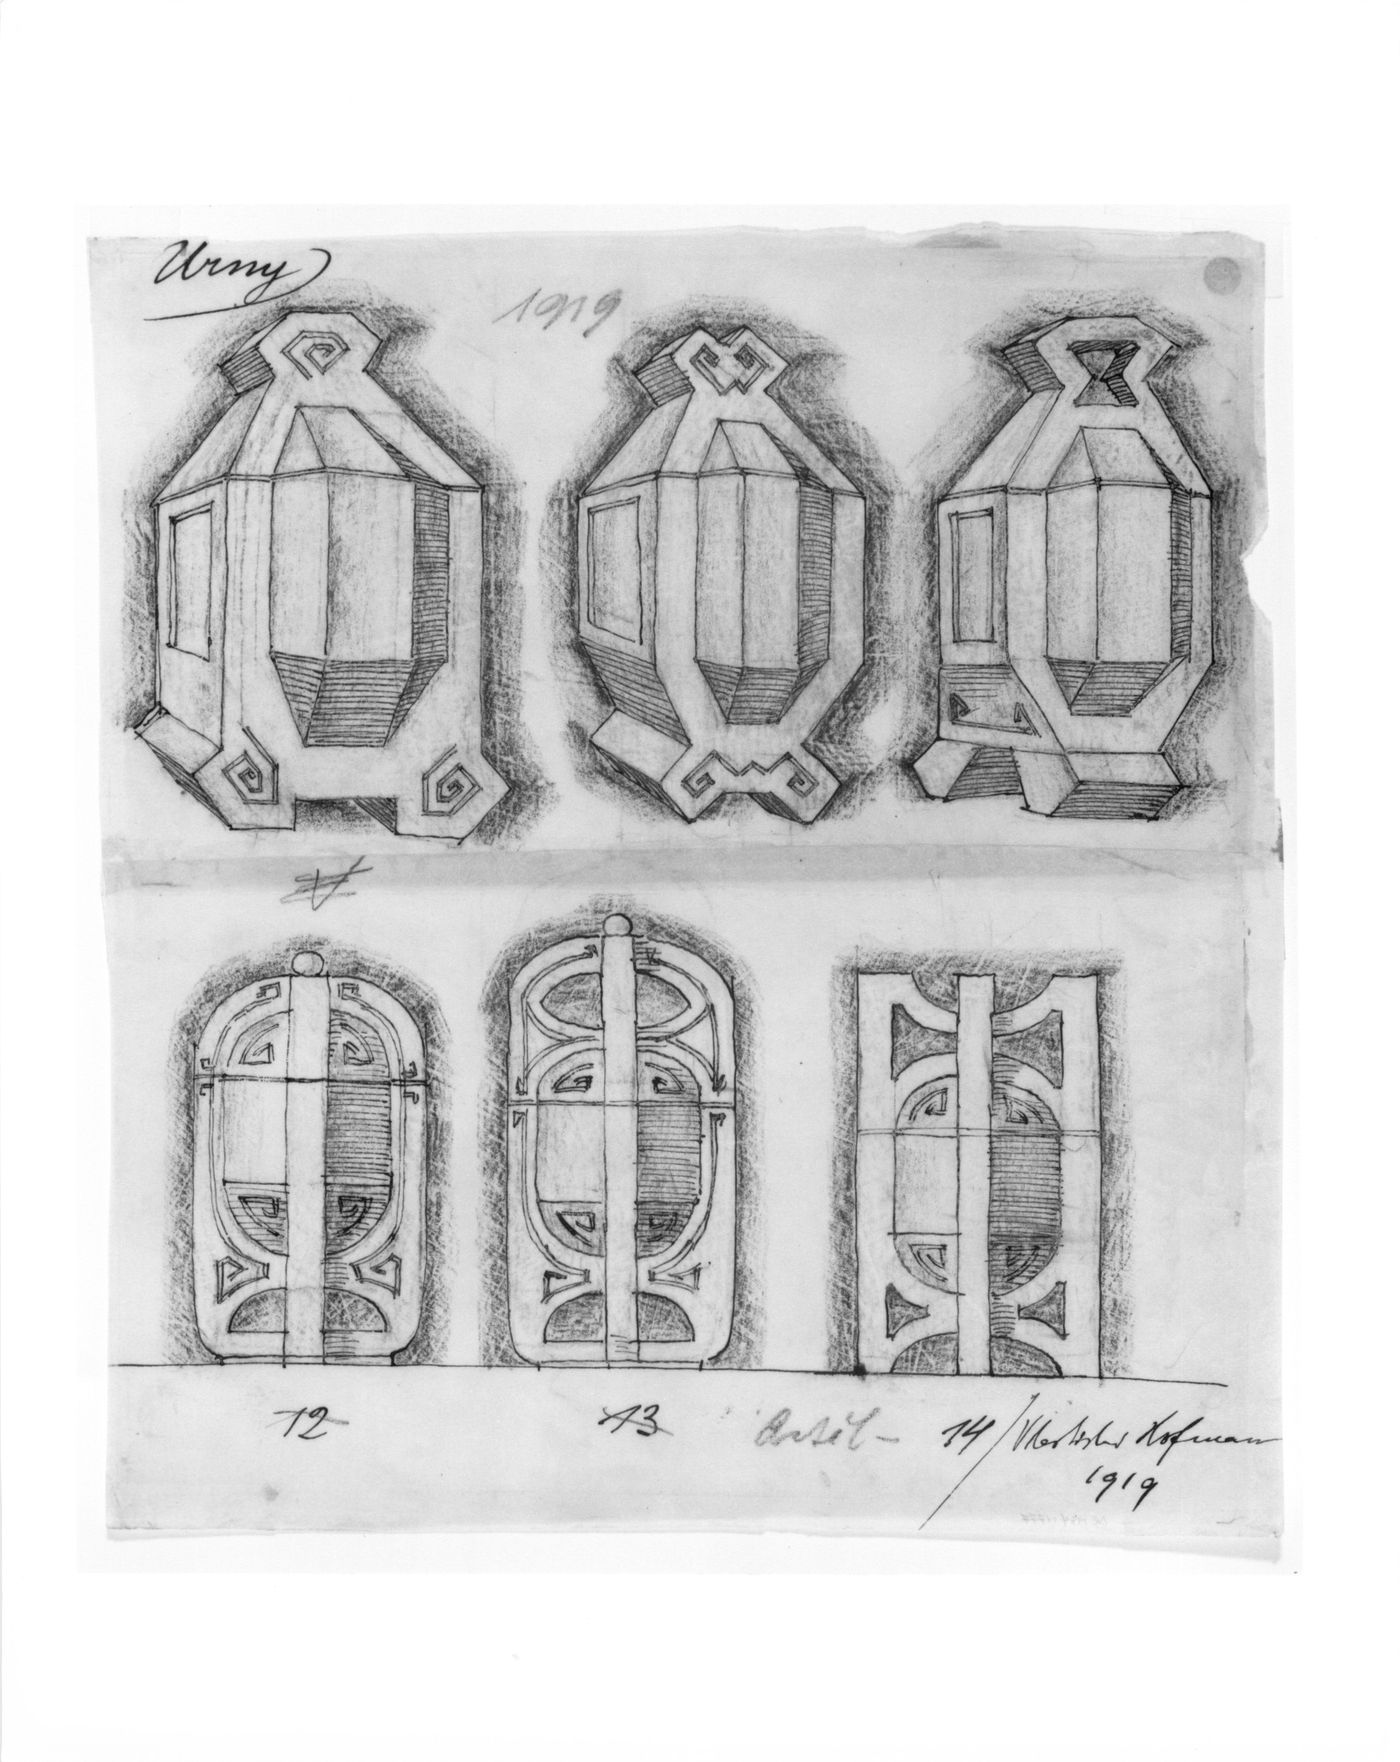 Designs for boxes and urns